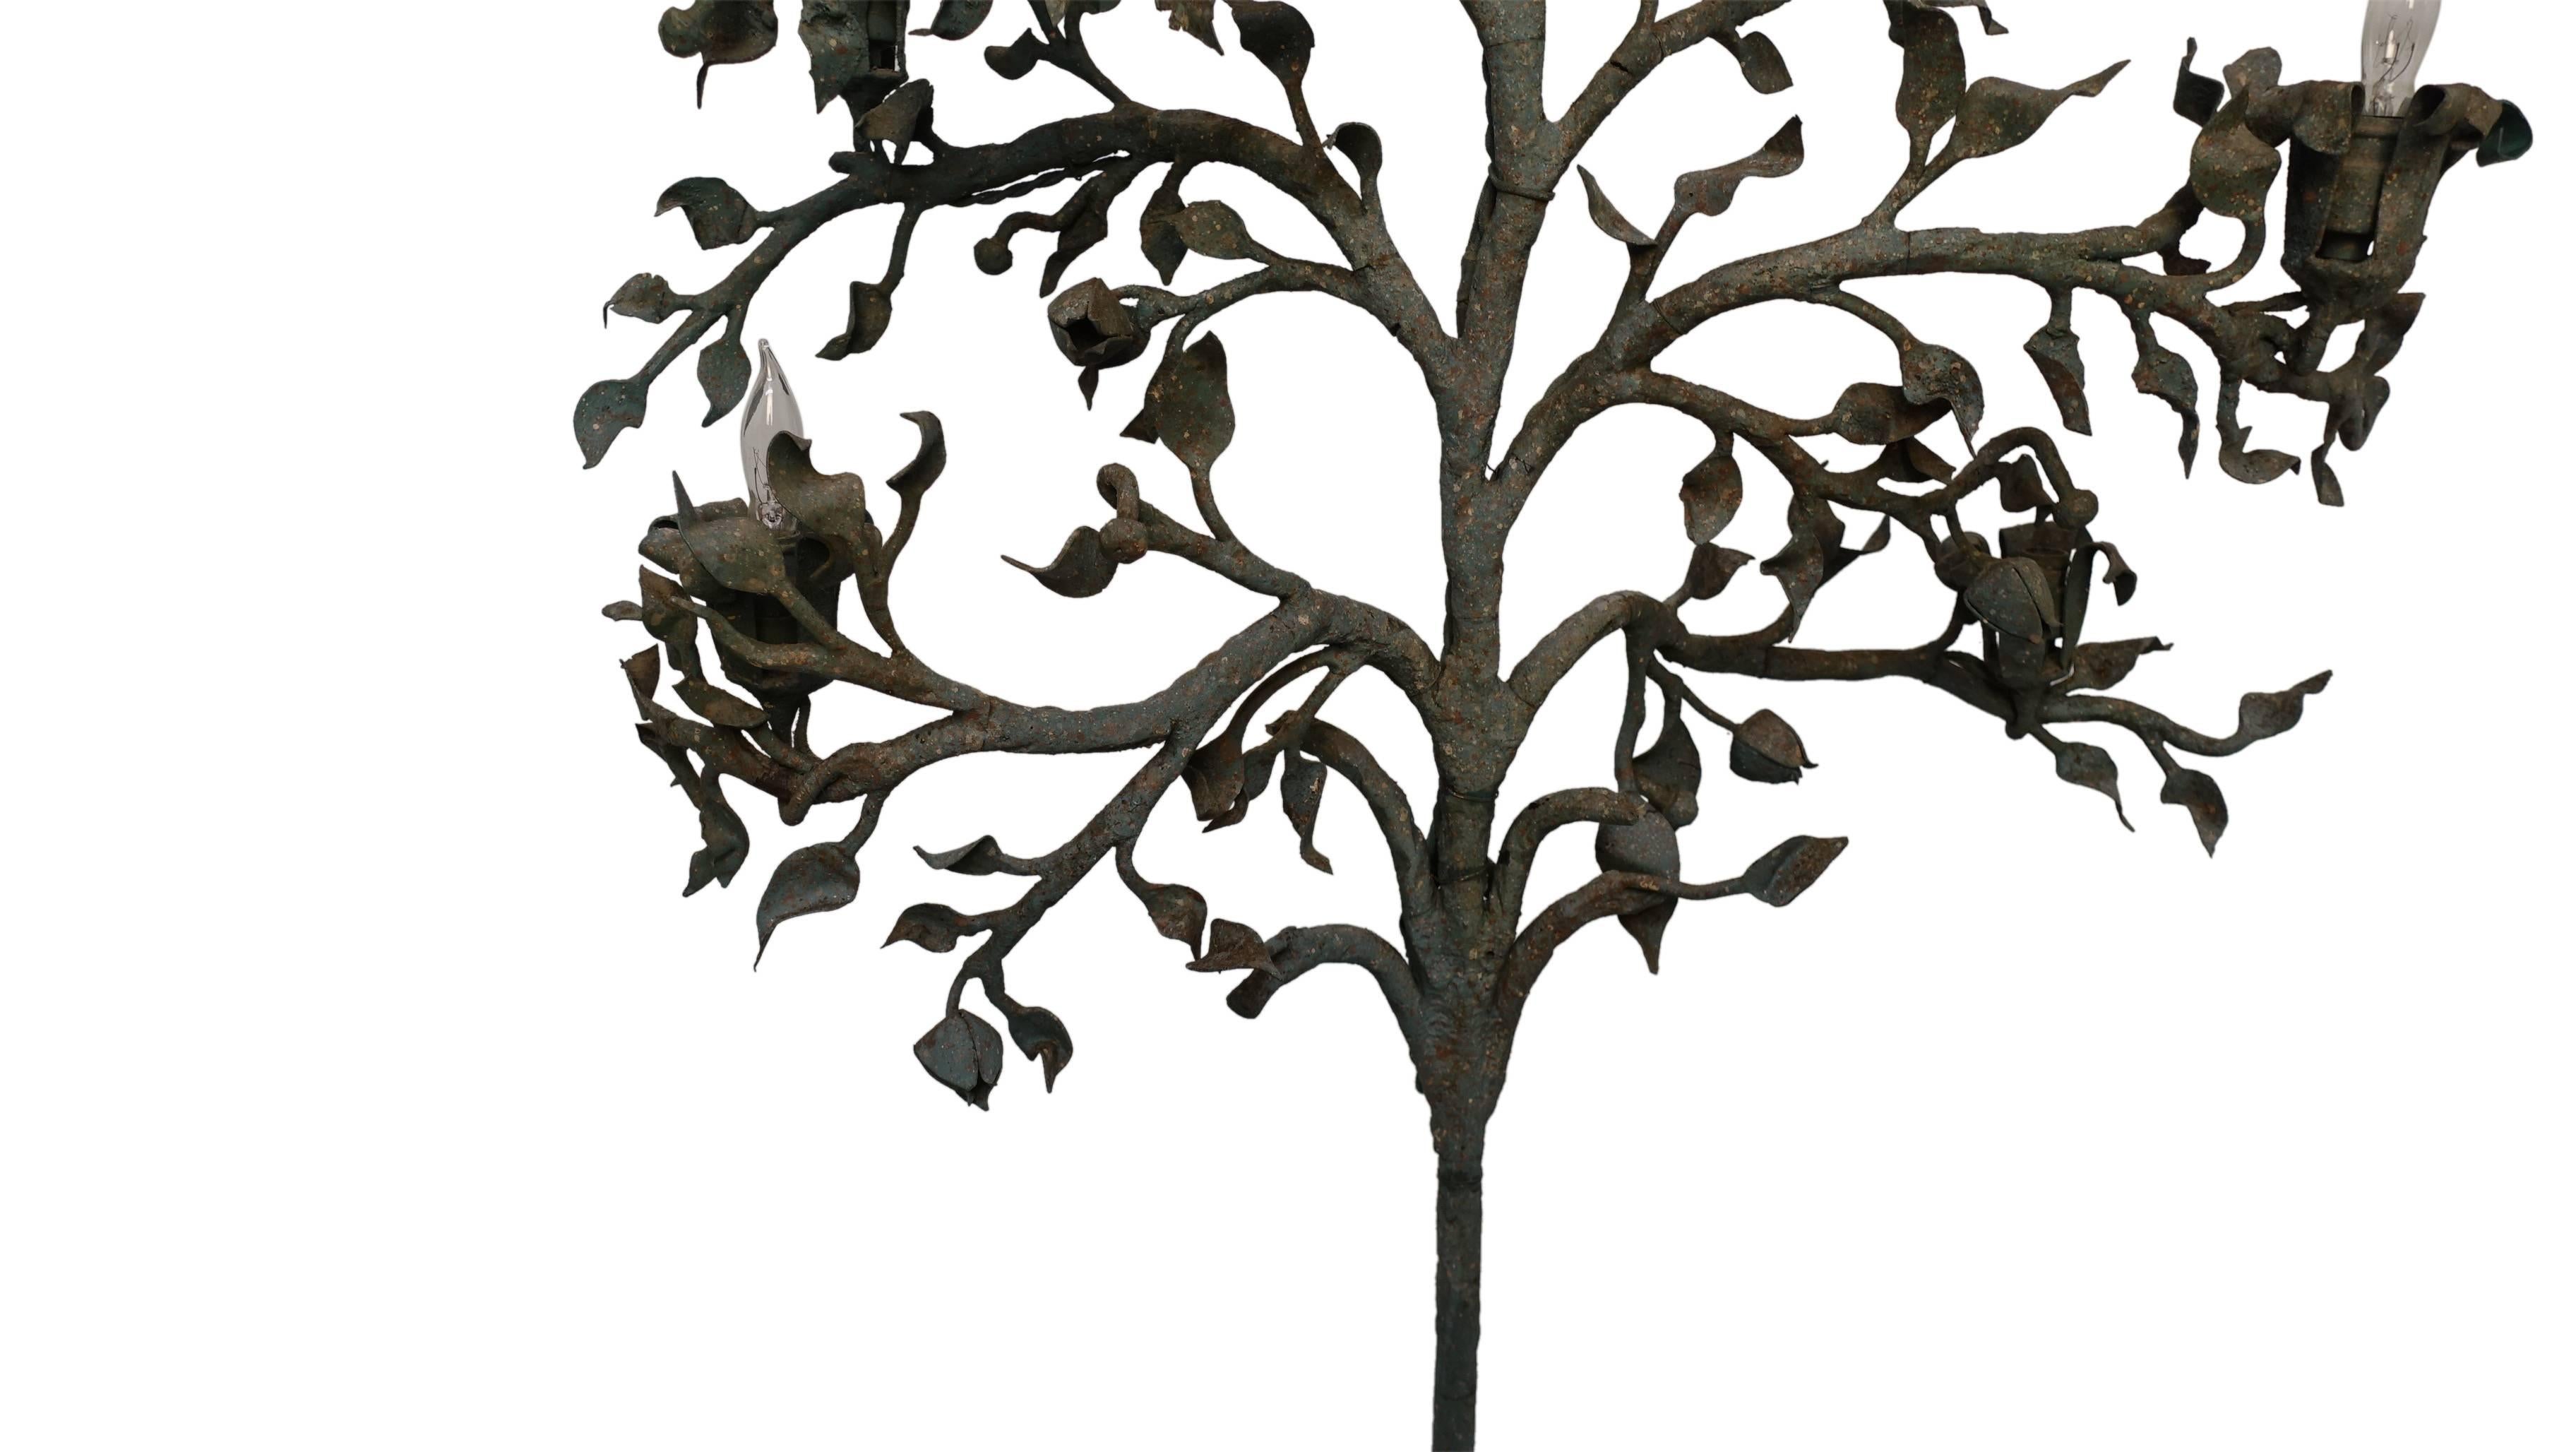 Pair of Wrought Iron Tree Form Torchiere Floor Lamps, Italy, 19th Century 2